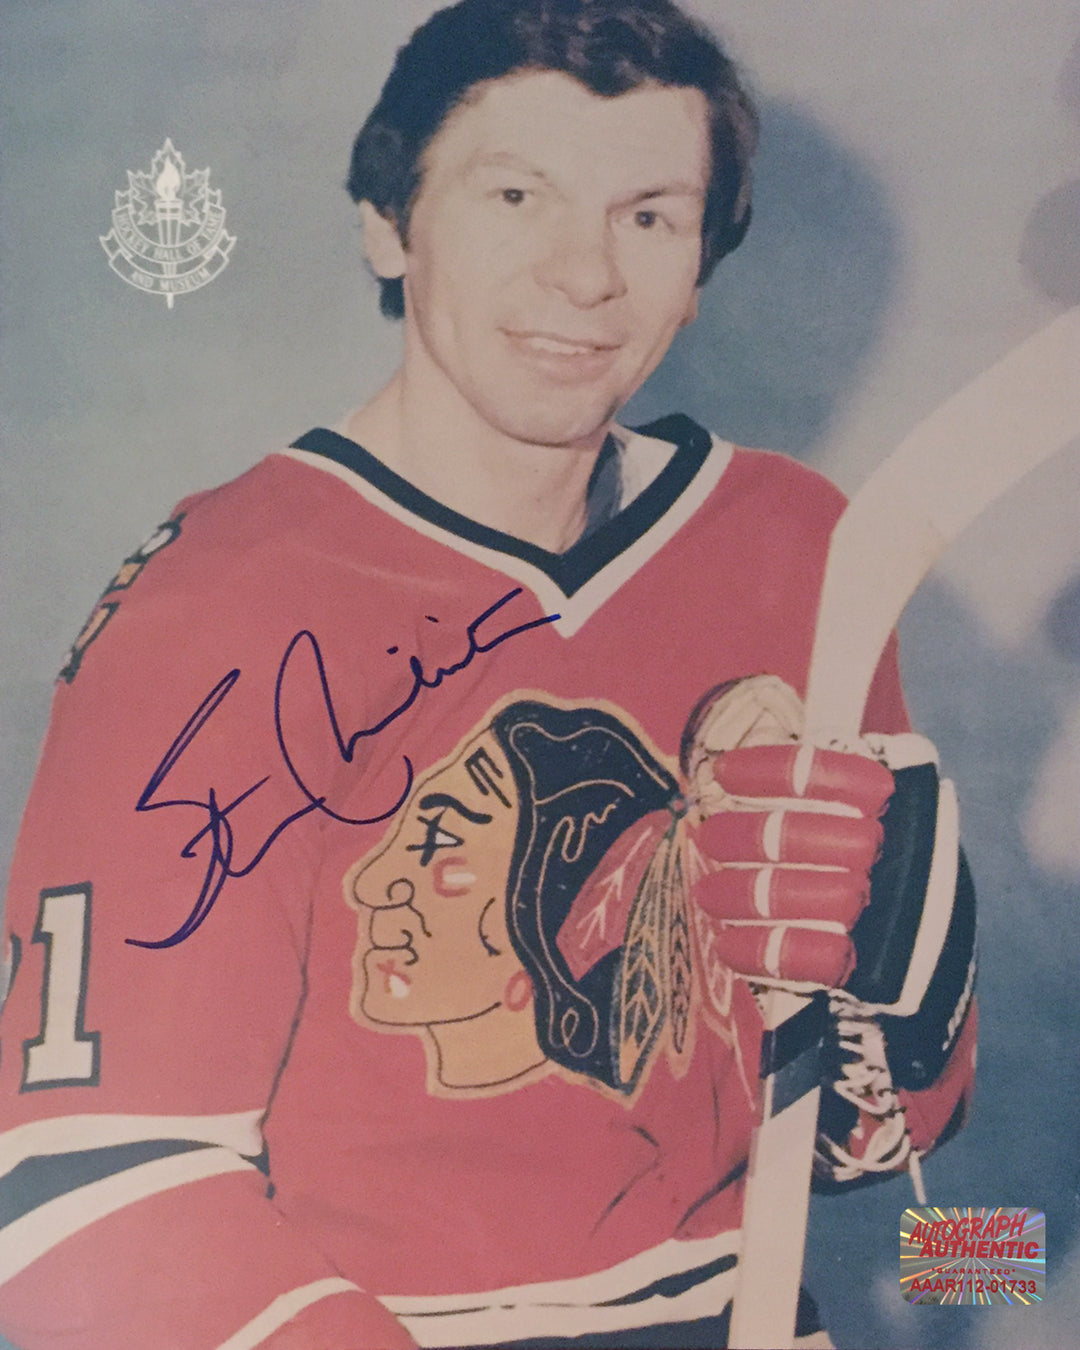 Autographed Stan Mikita 8X10 Photo - Chicago Blackhawks, Chicago Blackhawks, NHL, Hockey, Autographed, Signed, AAHPH31381